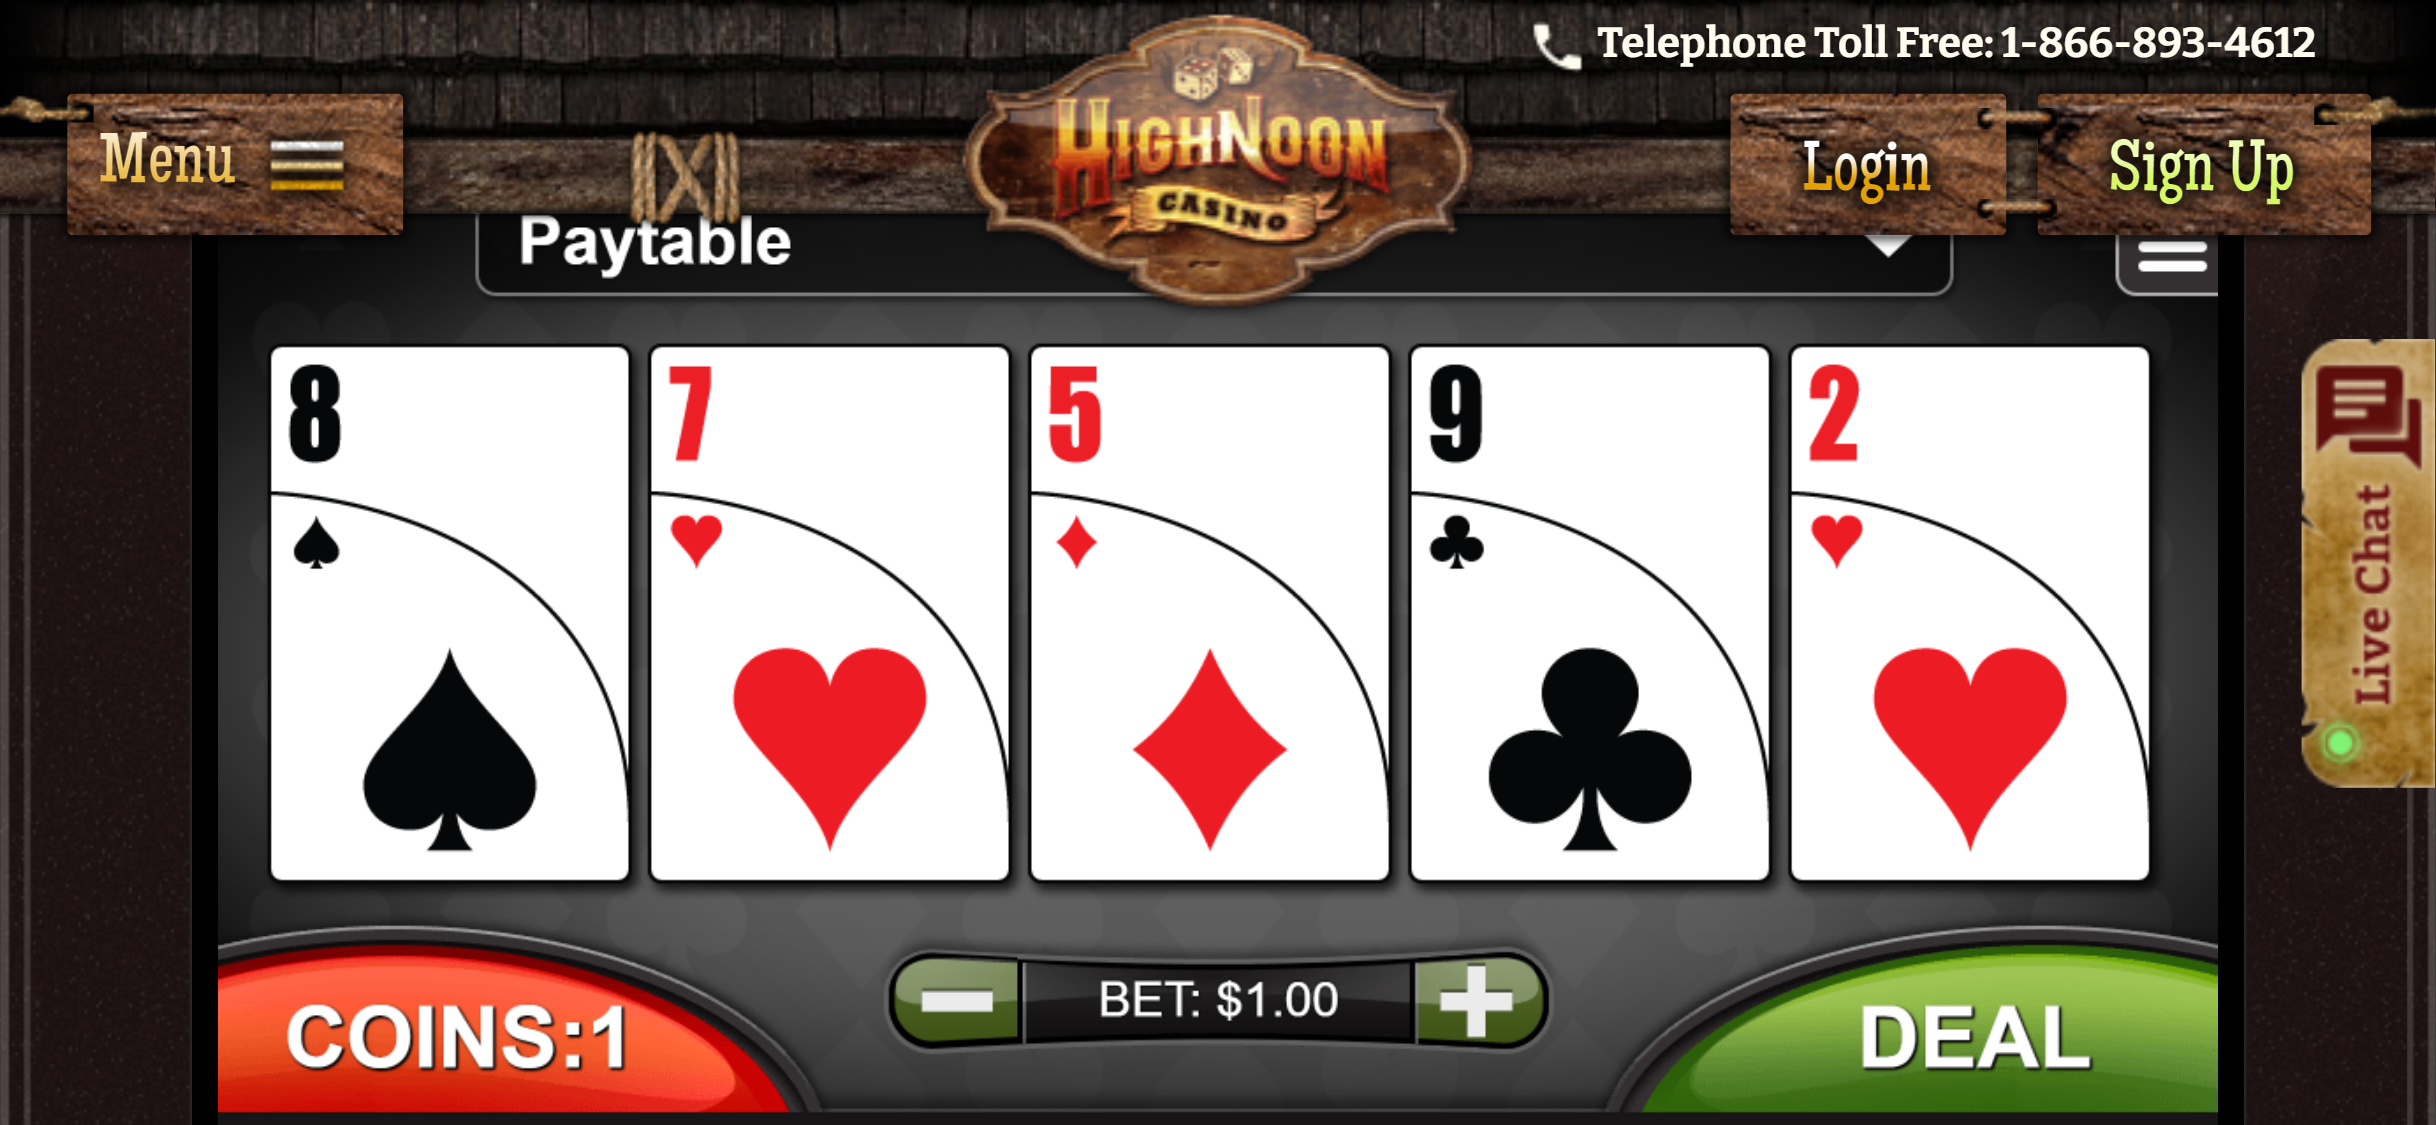 High Noon Casino Mobile Slots Review